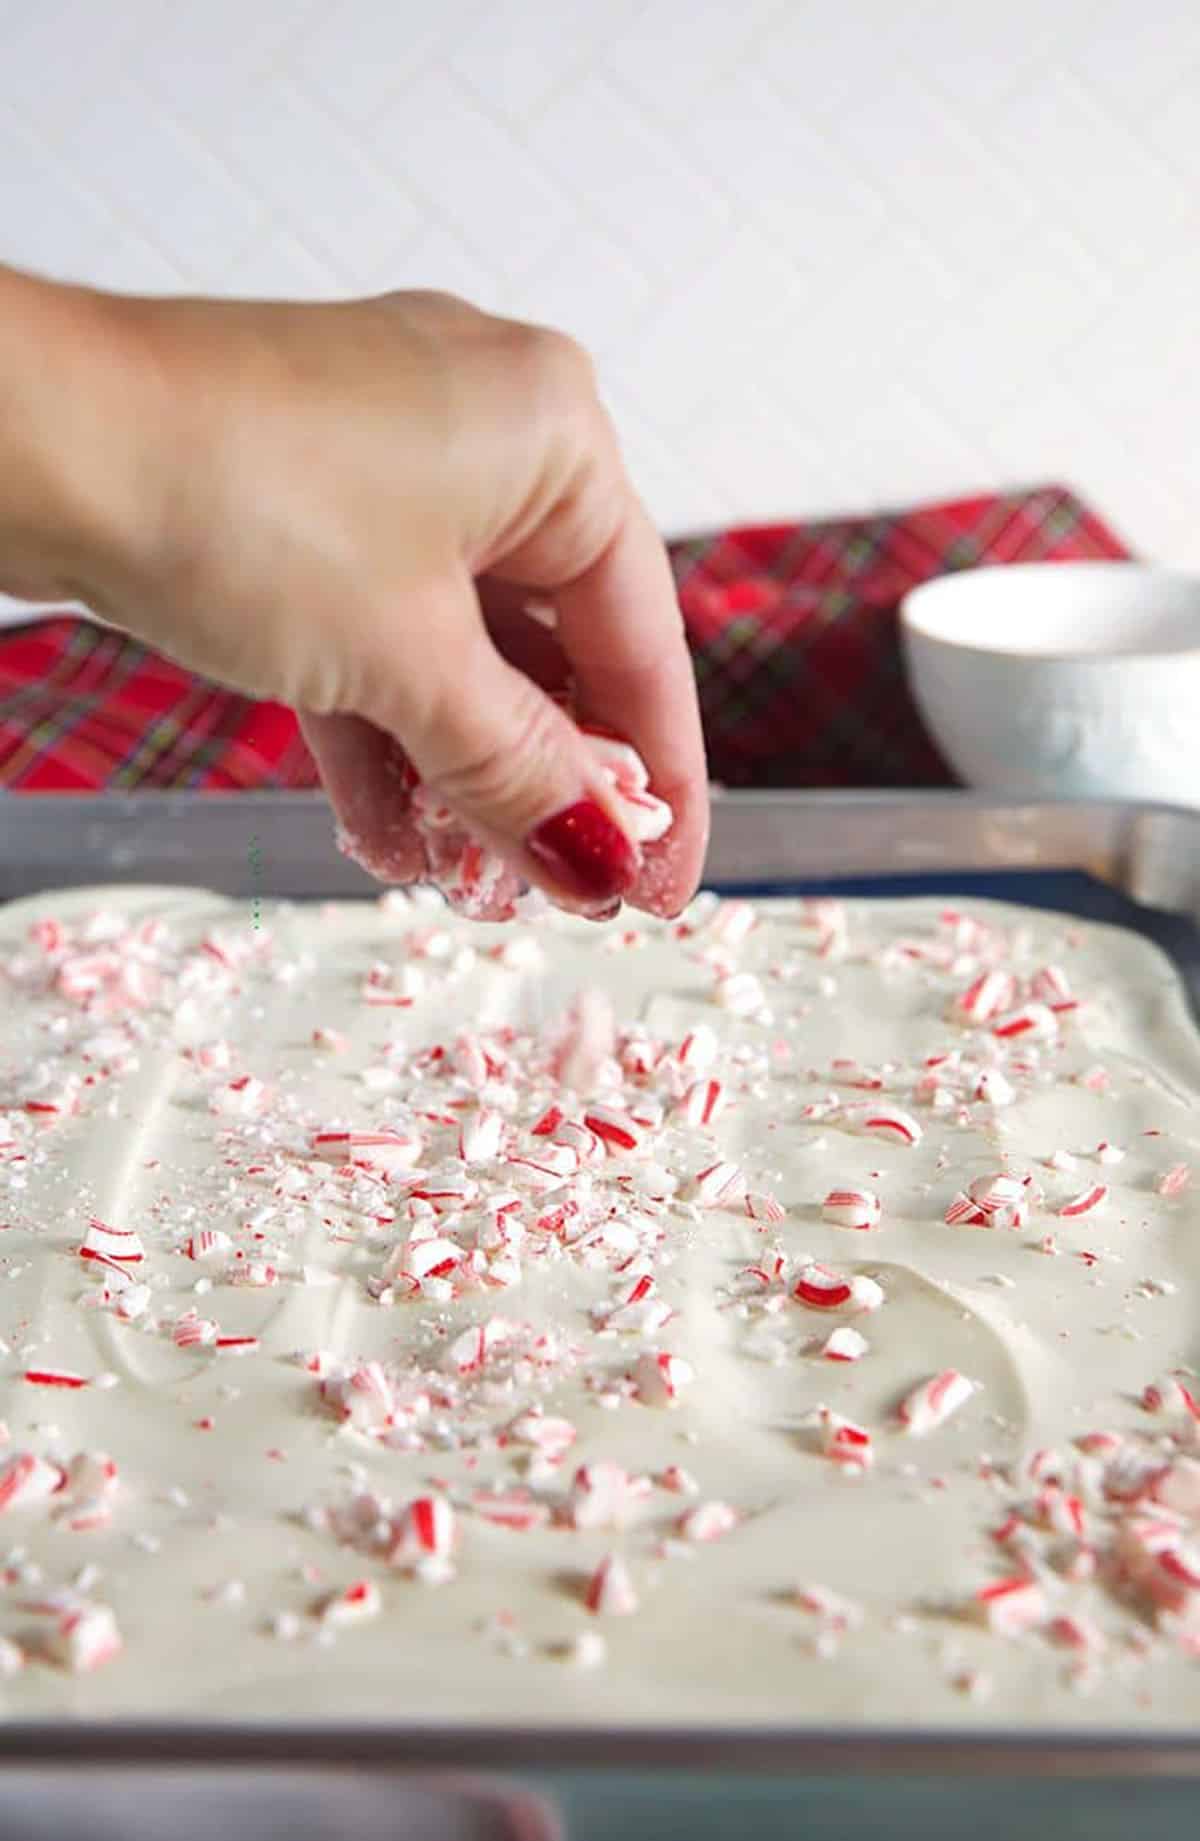 candy being sprinkled on peppermint bark.